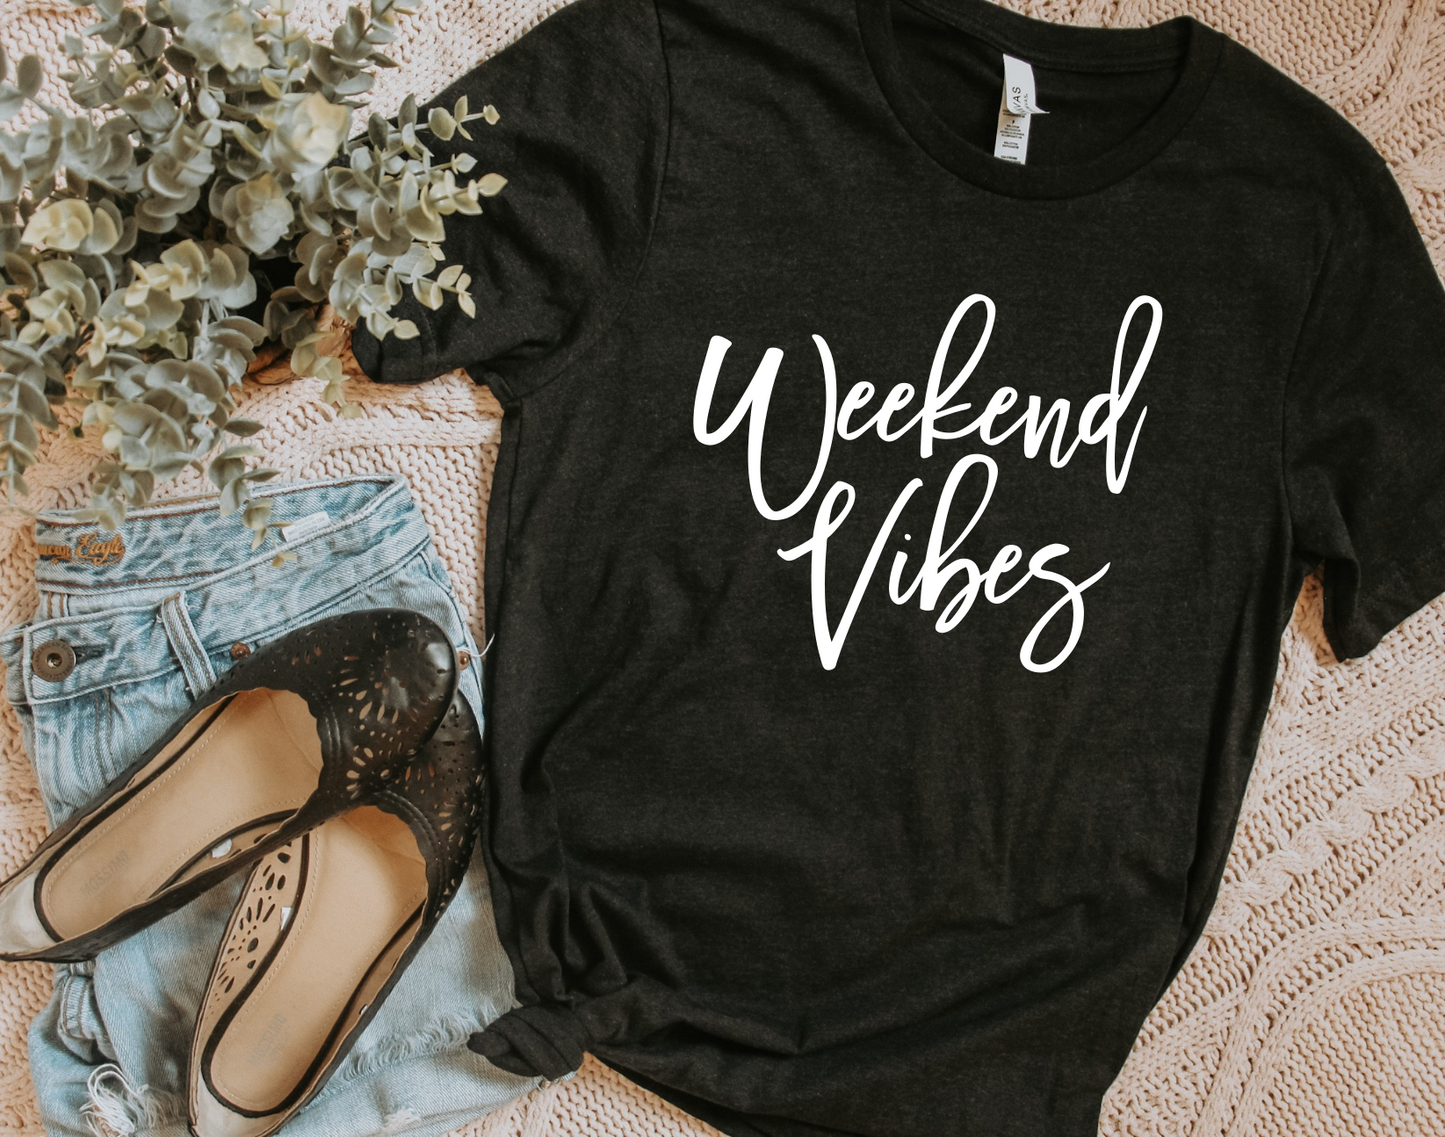 PREORDER CLOSING 6/20/21 - Weekend Vibes - SHIPS 7/1/21